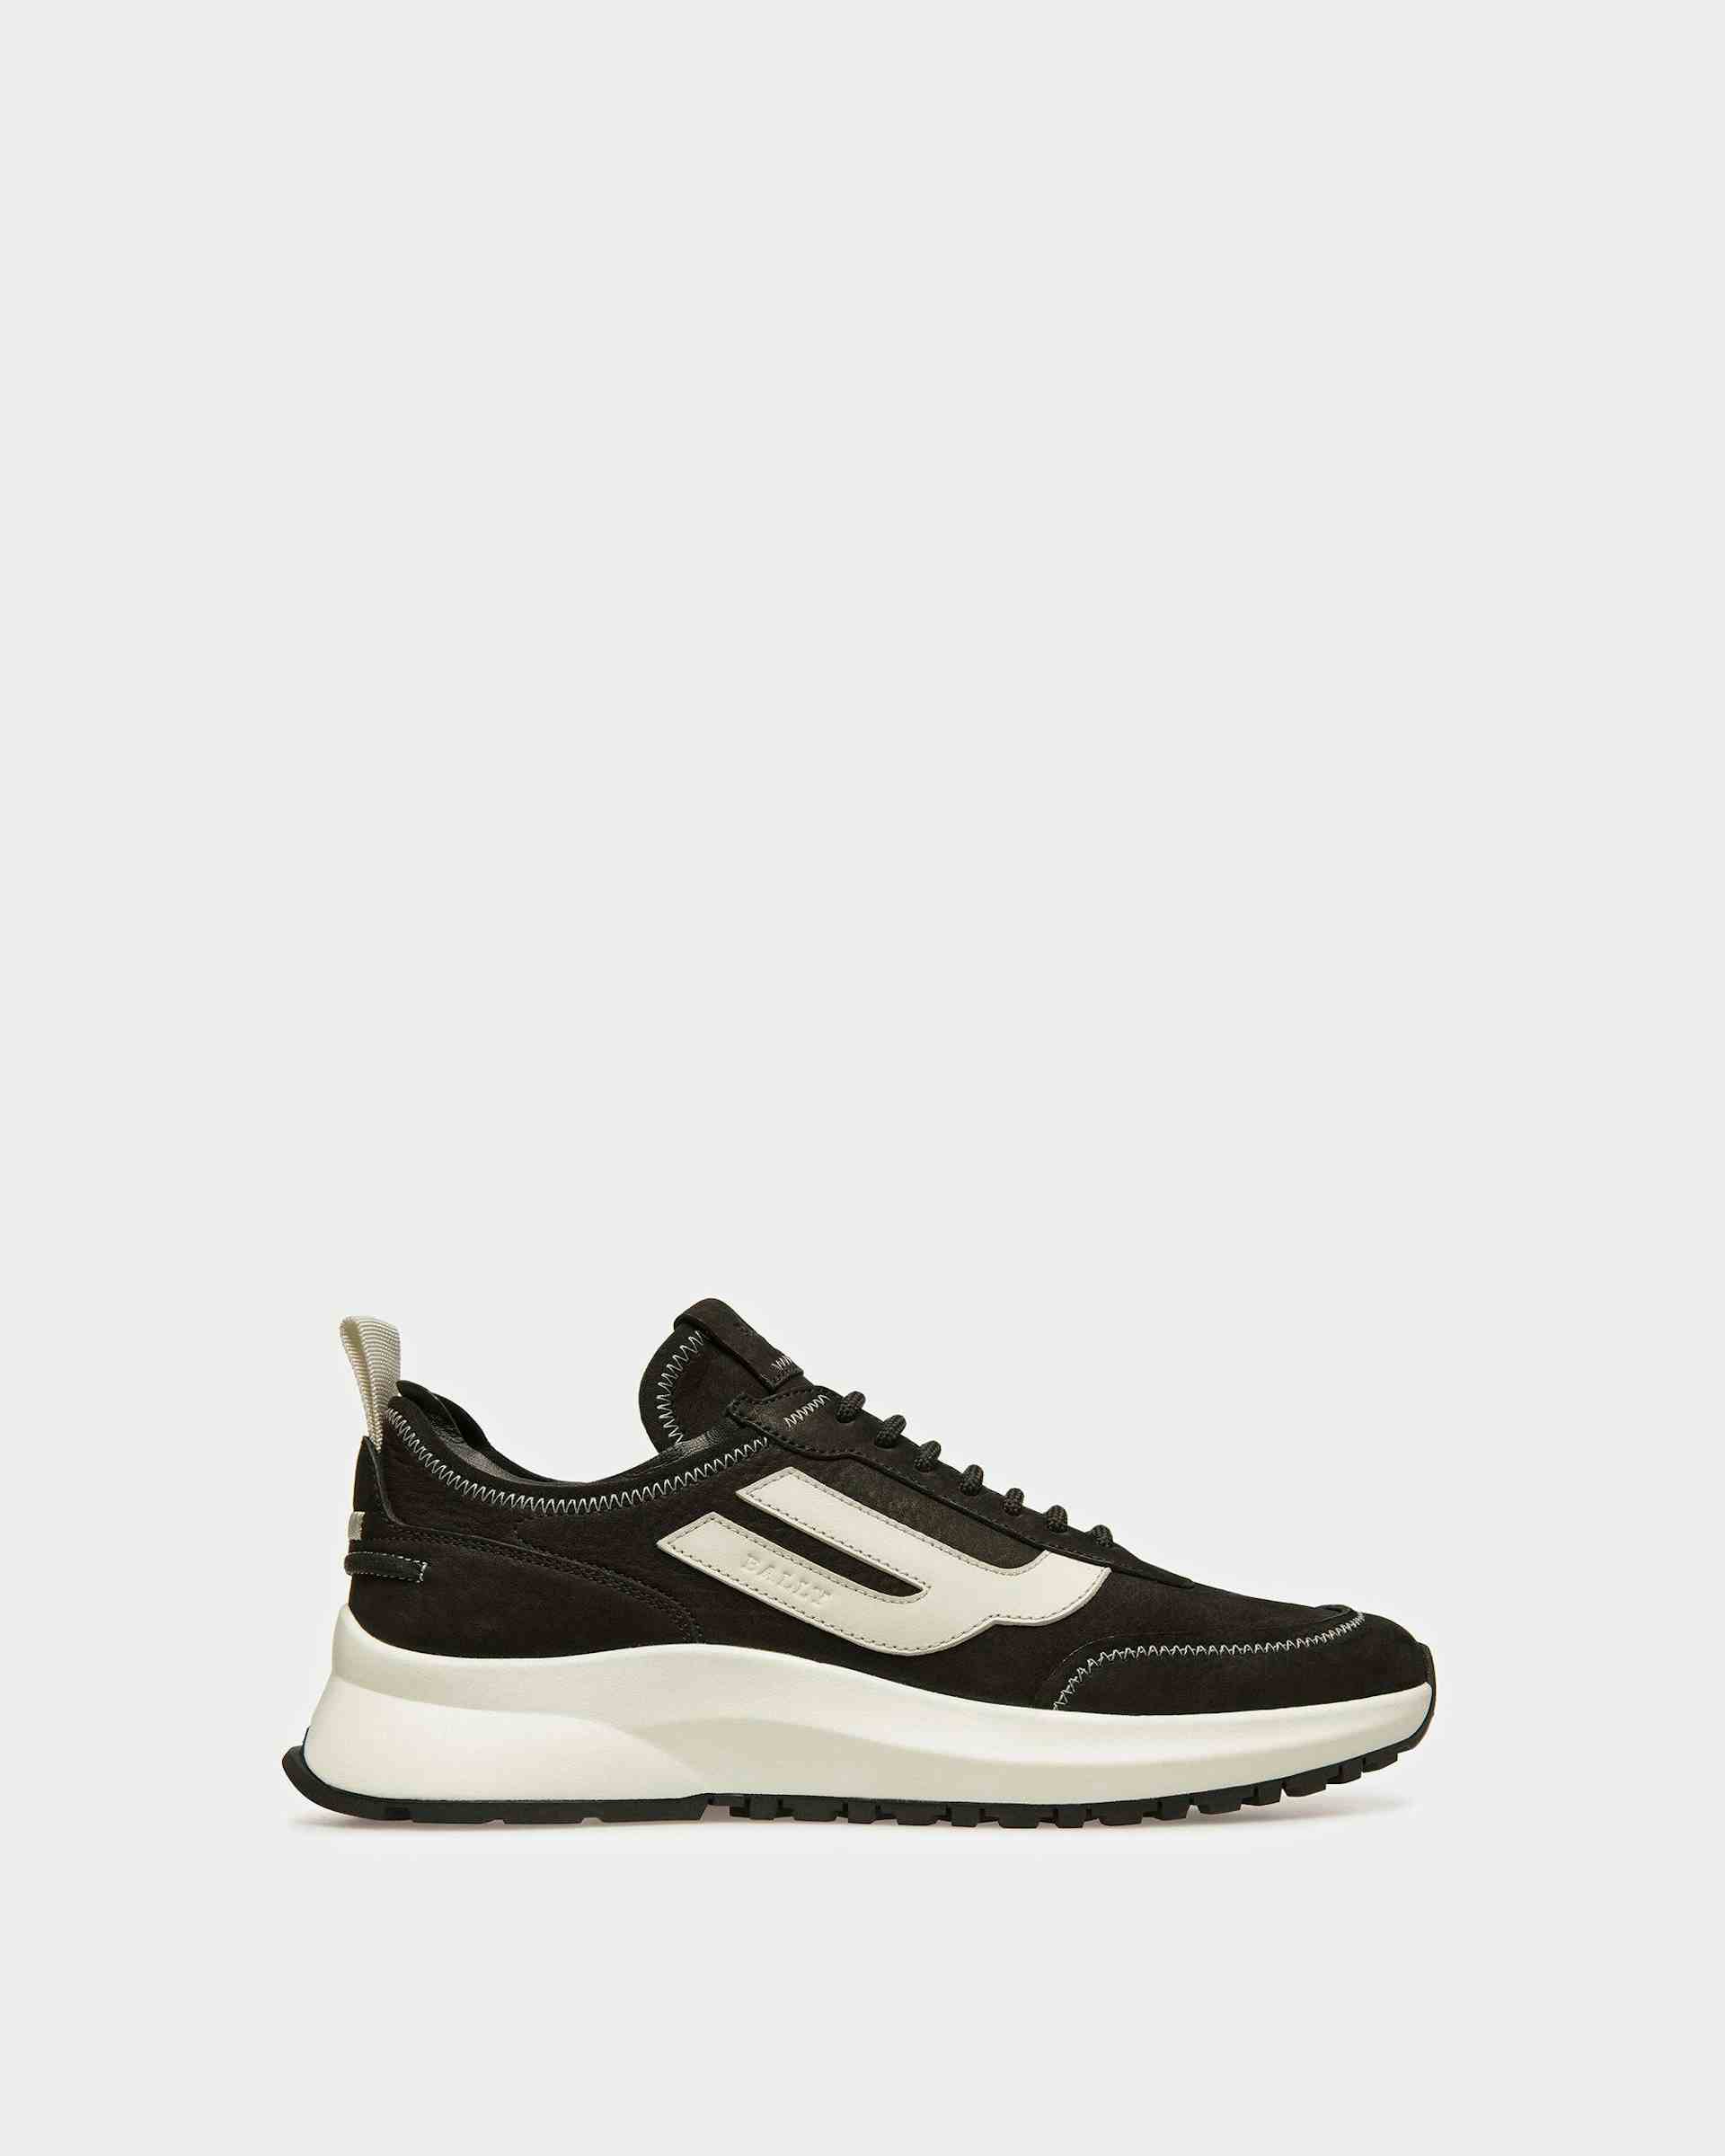 Darys Leather Sneakers In Black And Dusty White - Men's - Bally